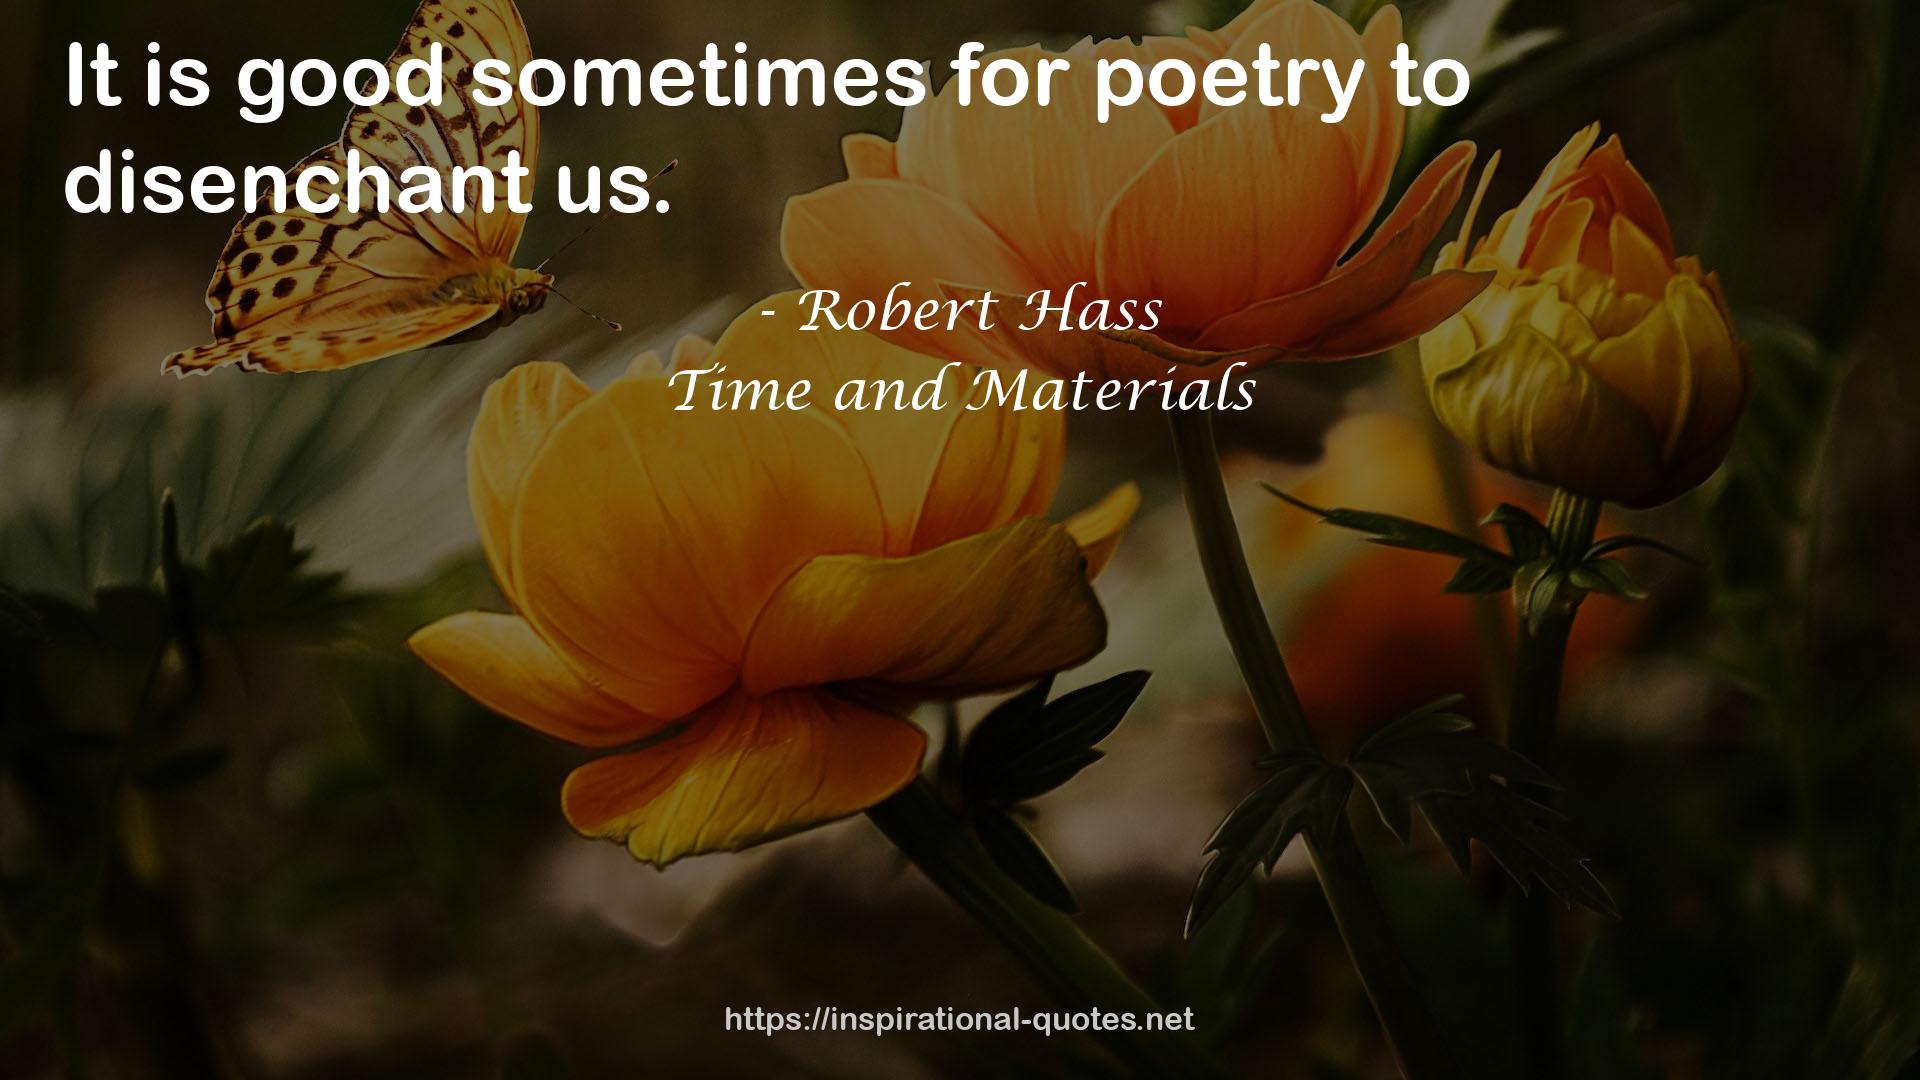 Time and Materials QUOTES